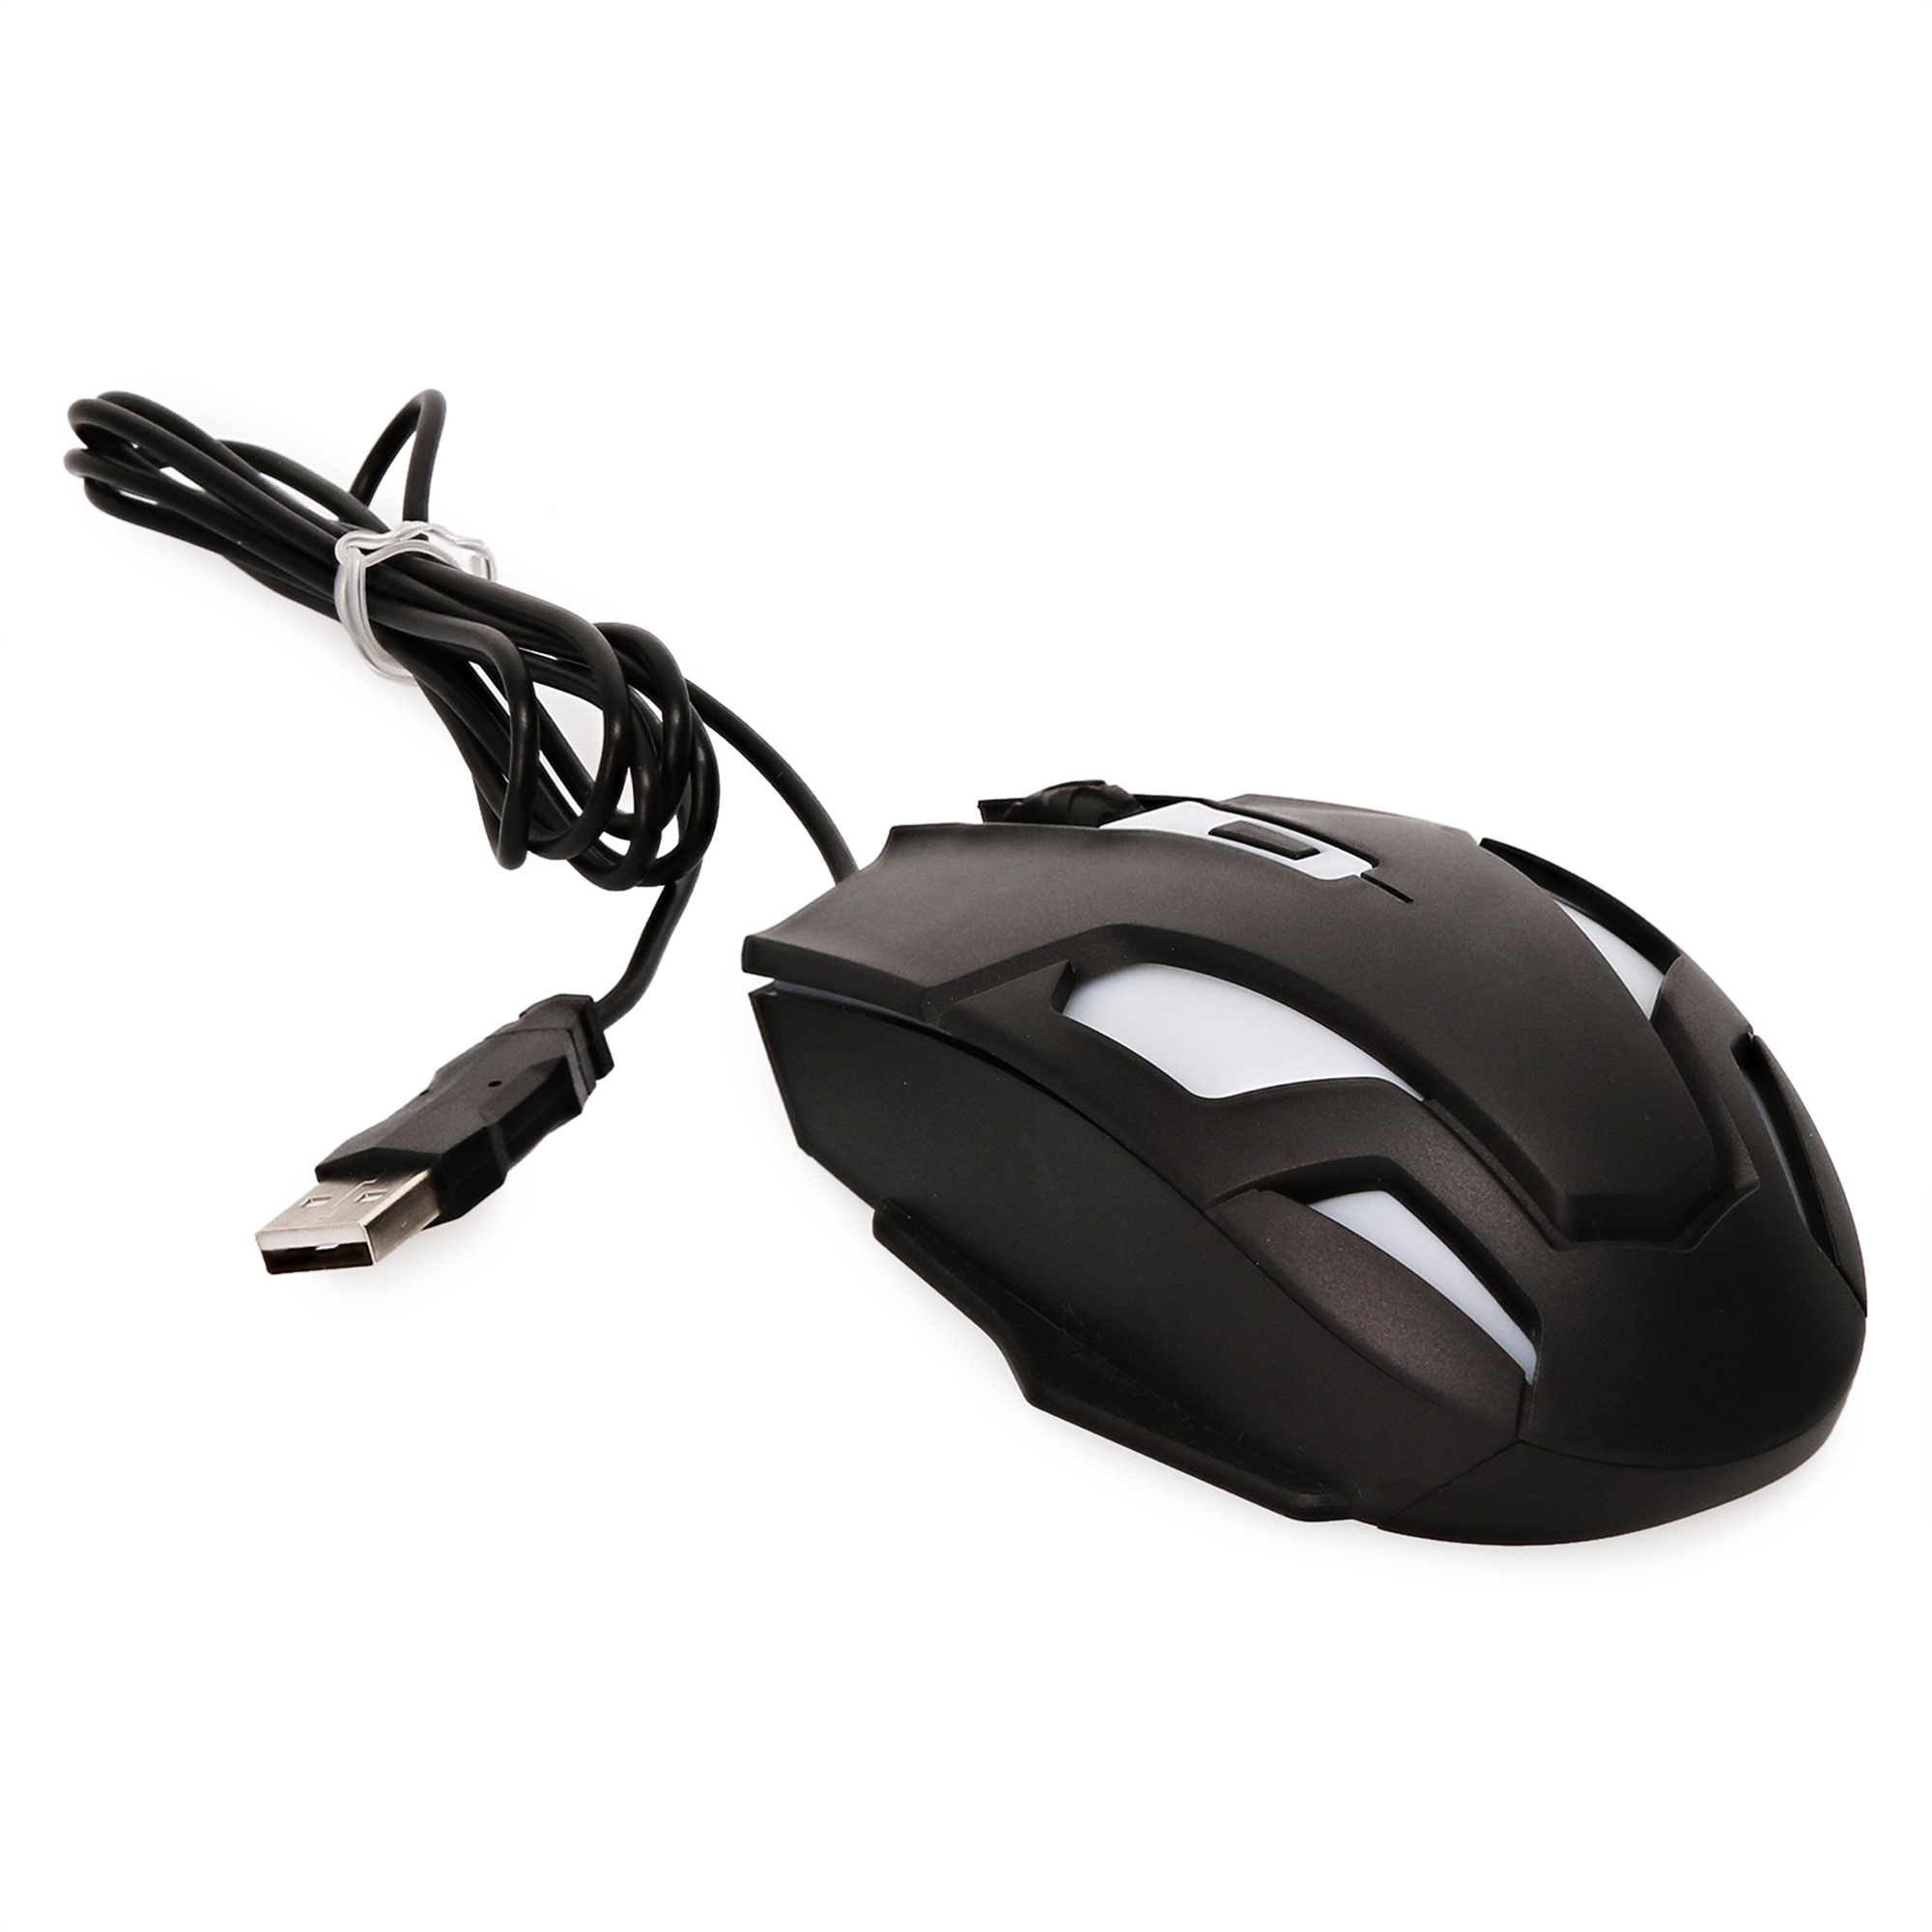 teal & white wired LED gaming mouse with adjustable dpi